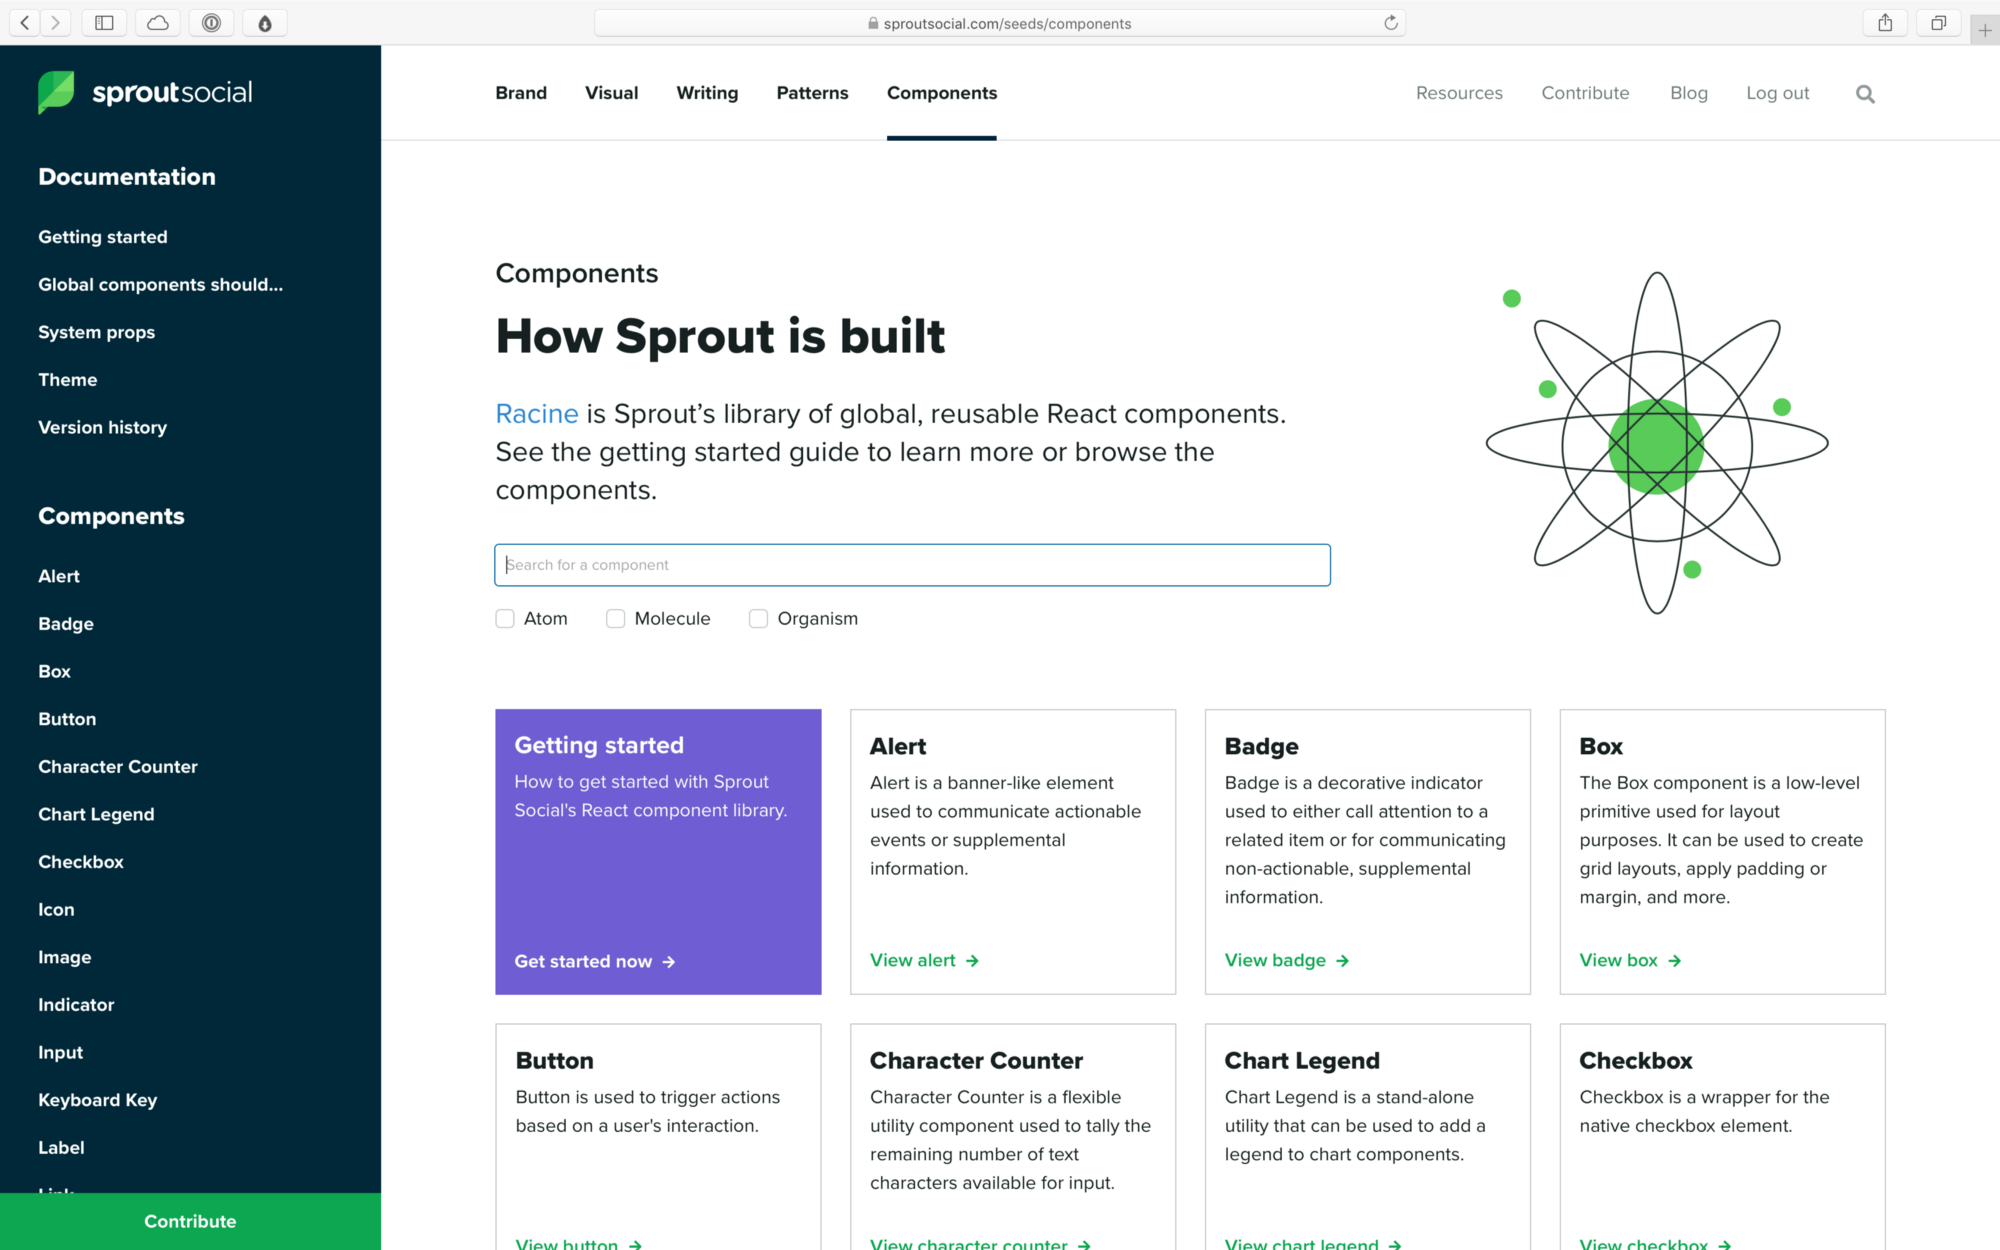 Our component library now lives right inside our design system, at seeds.sproutsocial.com/components